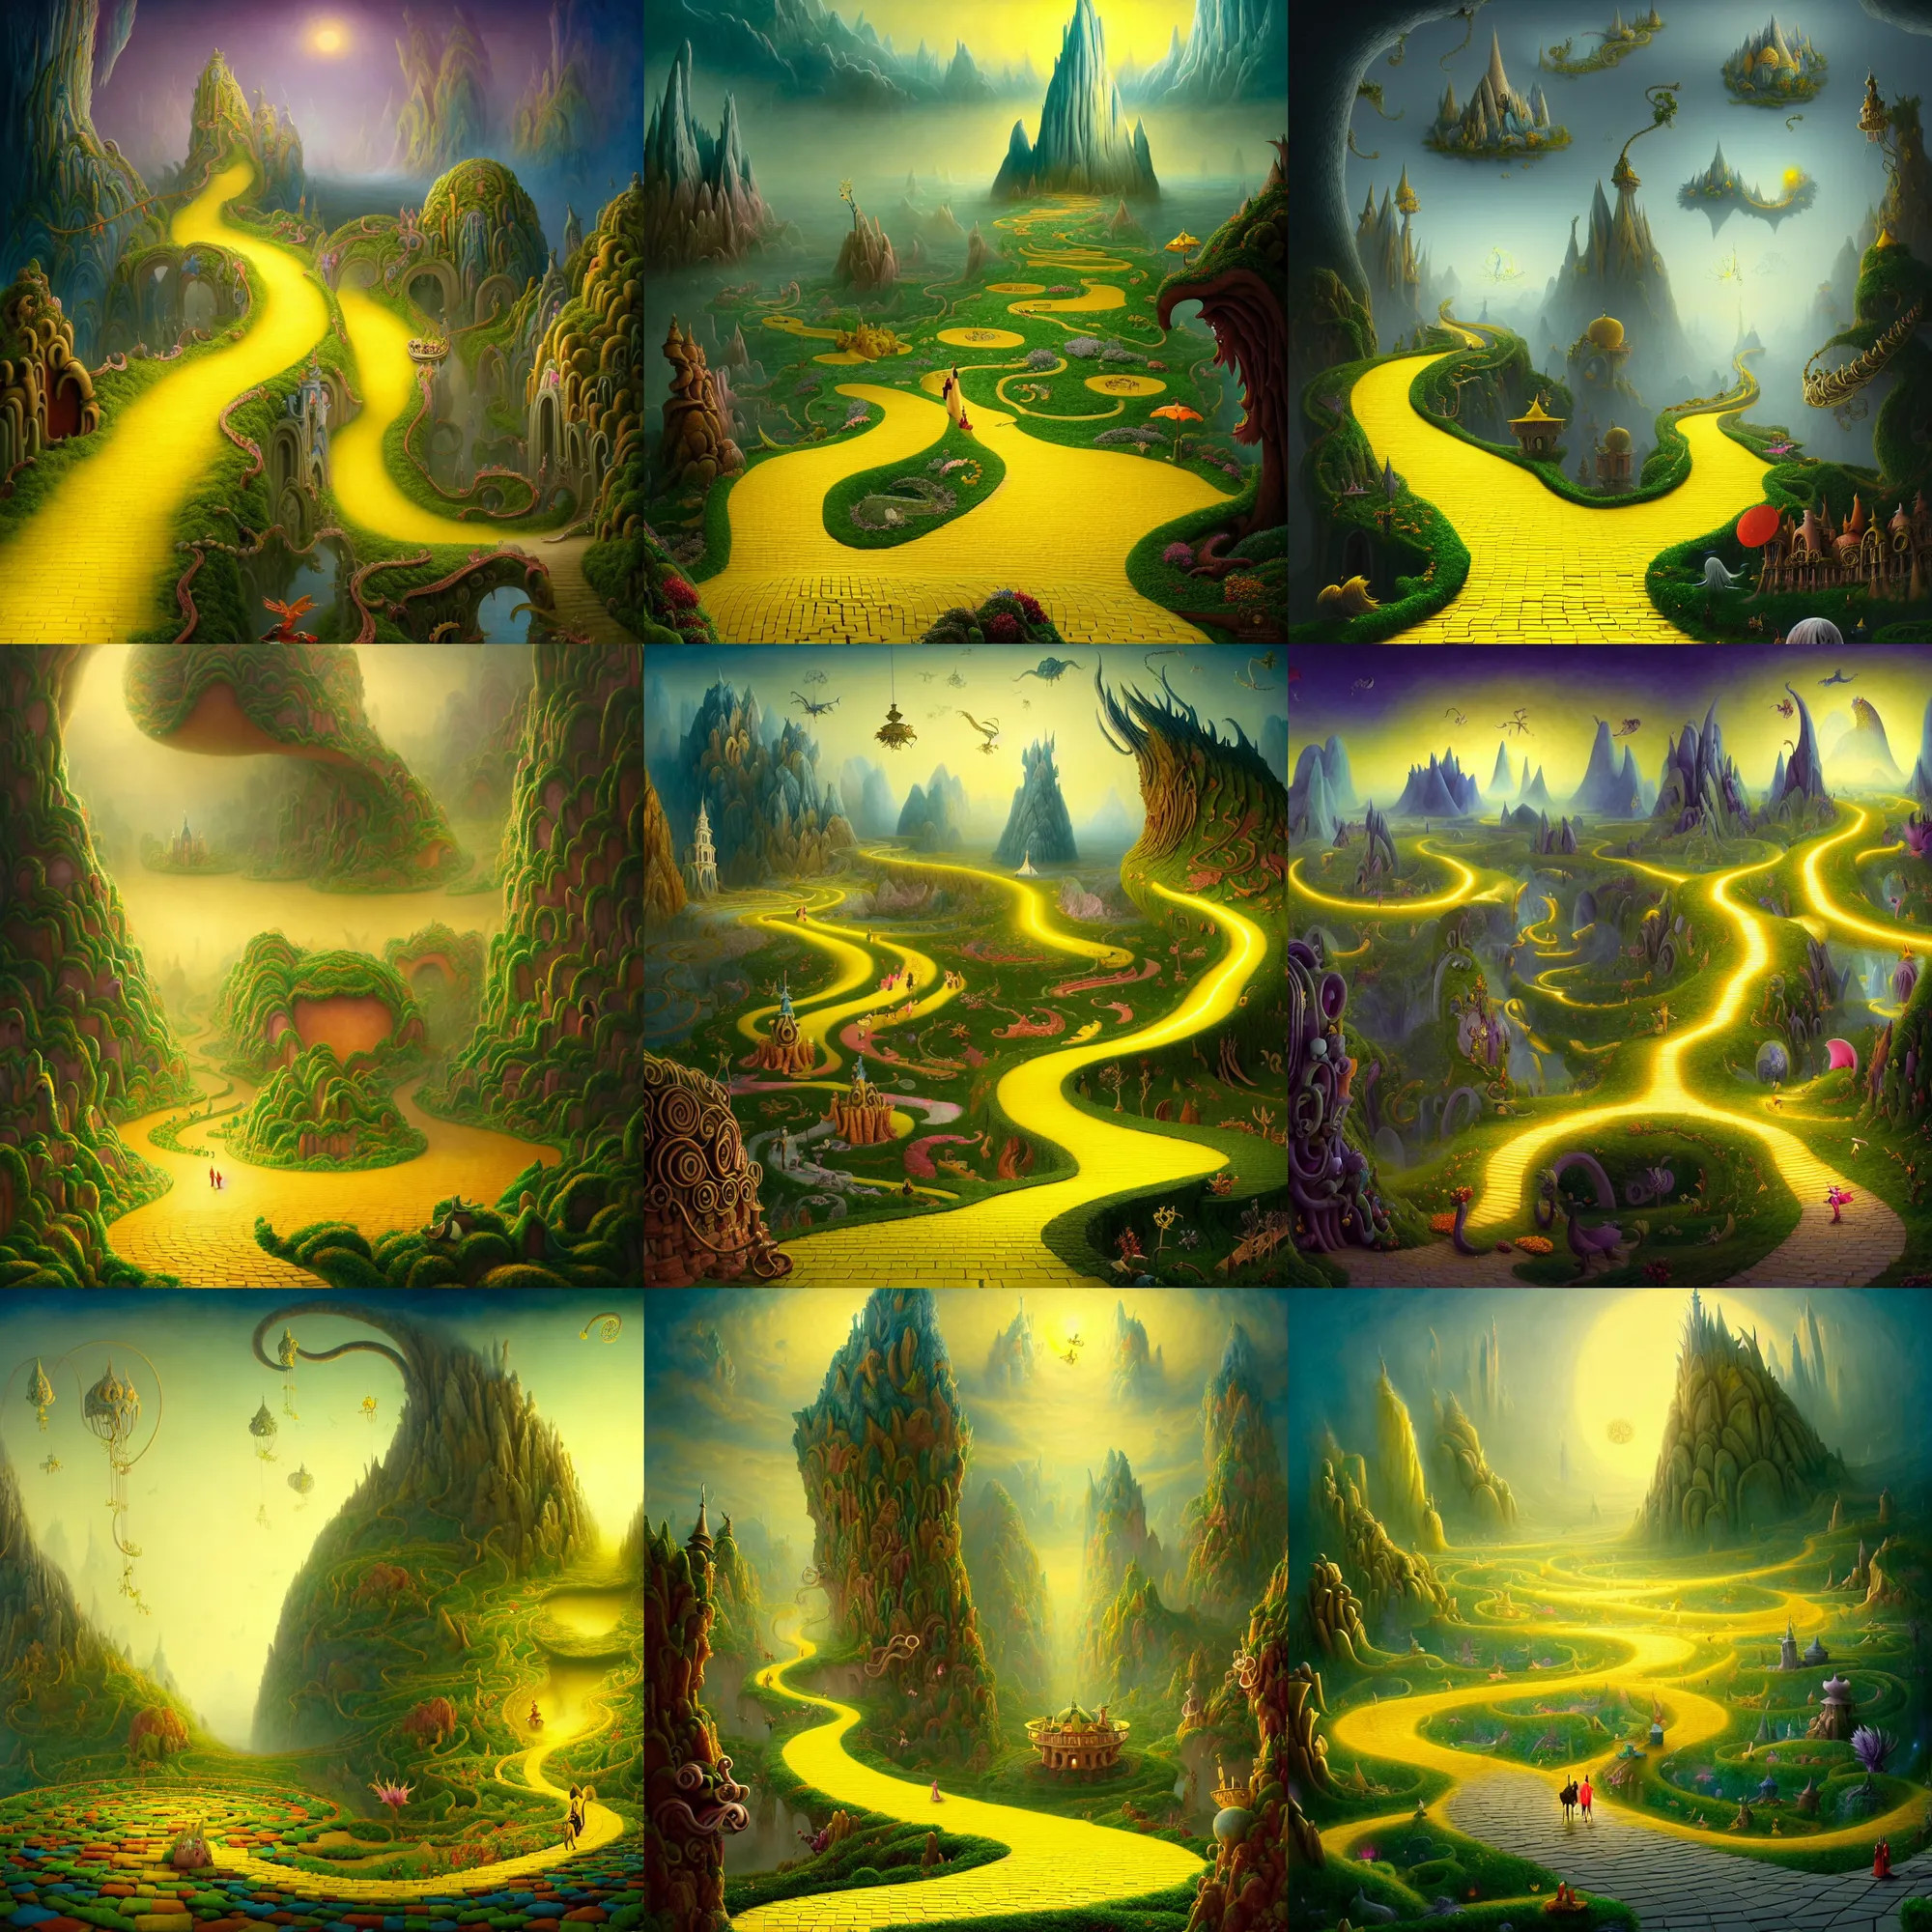 Prompt: a beguiling epic stunning beautiful and insanely detailed matte painting of the impossible winding path yellow brick road in dream worlds with surreal architecture designed by Heironymous Bosch, dream world populated with mythical whimsical creatures, mega structures inspired by Heironymous Bosch's Garden of Earthly Delights, vast surreal landscape and horizon by Asher Durand and Cyril Rolando and Filip Hodas, masterpiece!!!, grand!, imaginative!!!, whimsical!!, epic scale, intricate details, sense of awe, elite, wonder, insanely complex, masterful composition!!!, sharp focus, fantasy realism, dramatic lighting